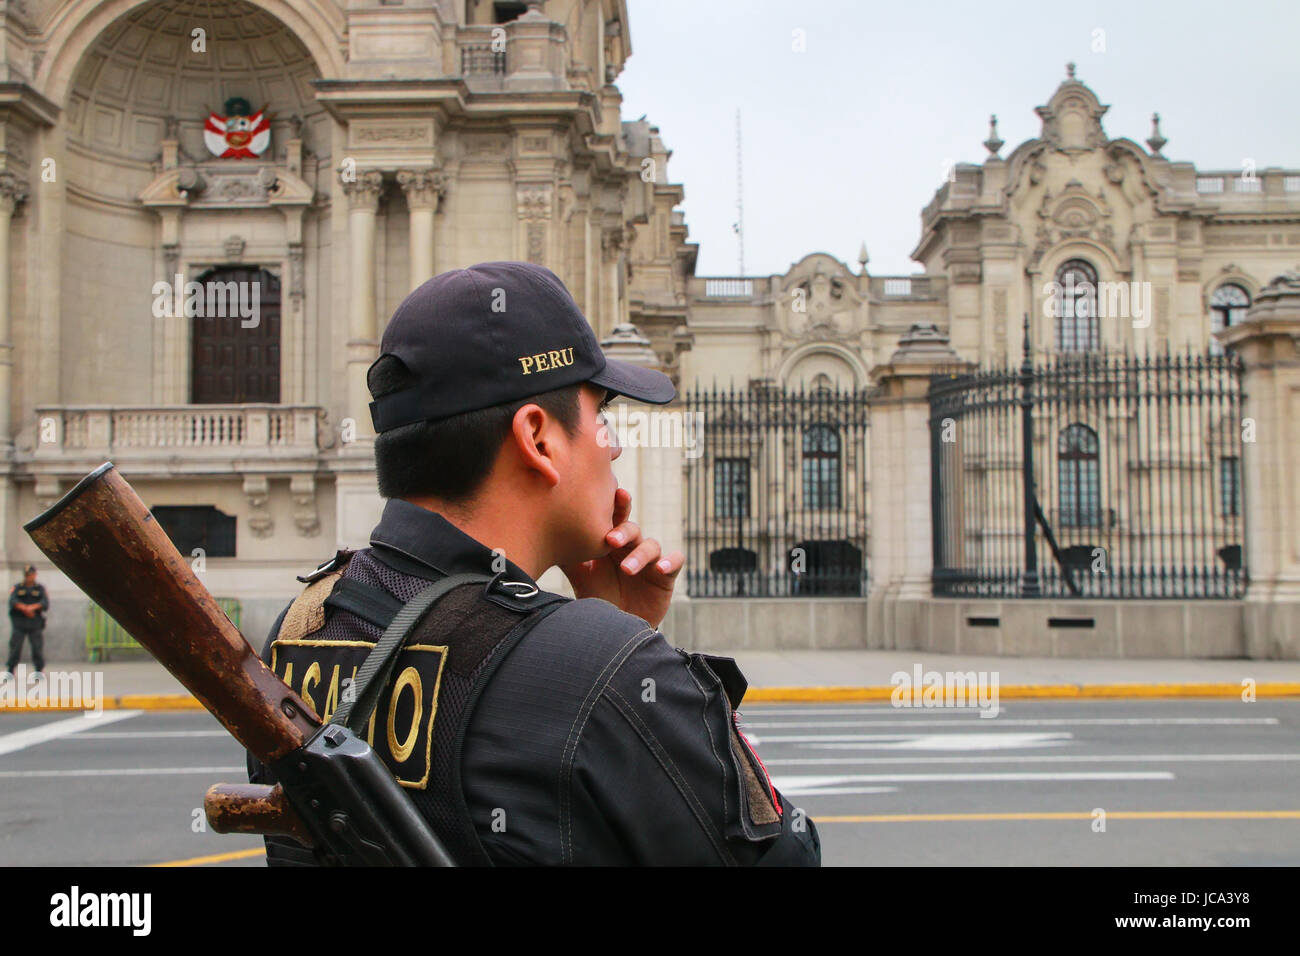 Policeman standing near Government Palace in Lima, Peru. Peruvian National Police is one of the largest police forces in South America. Stock Photo